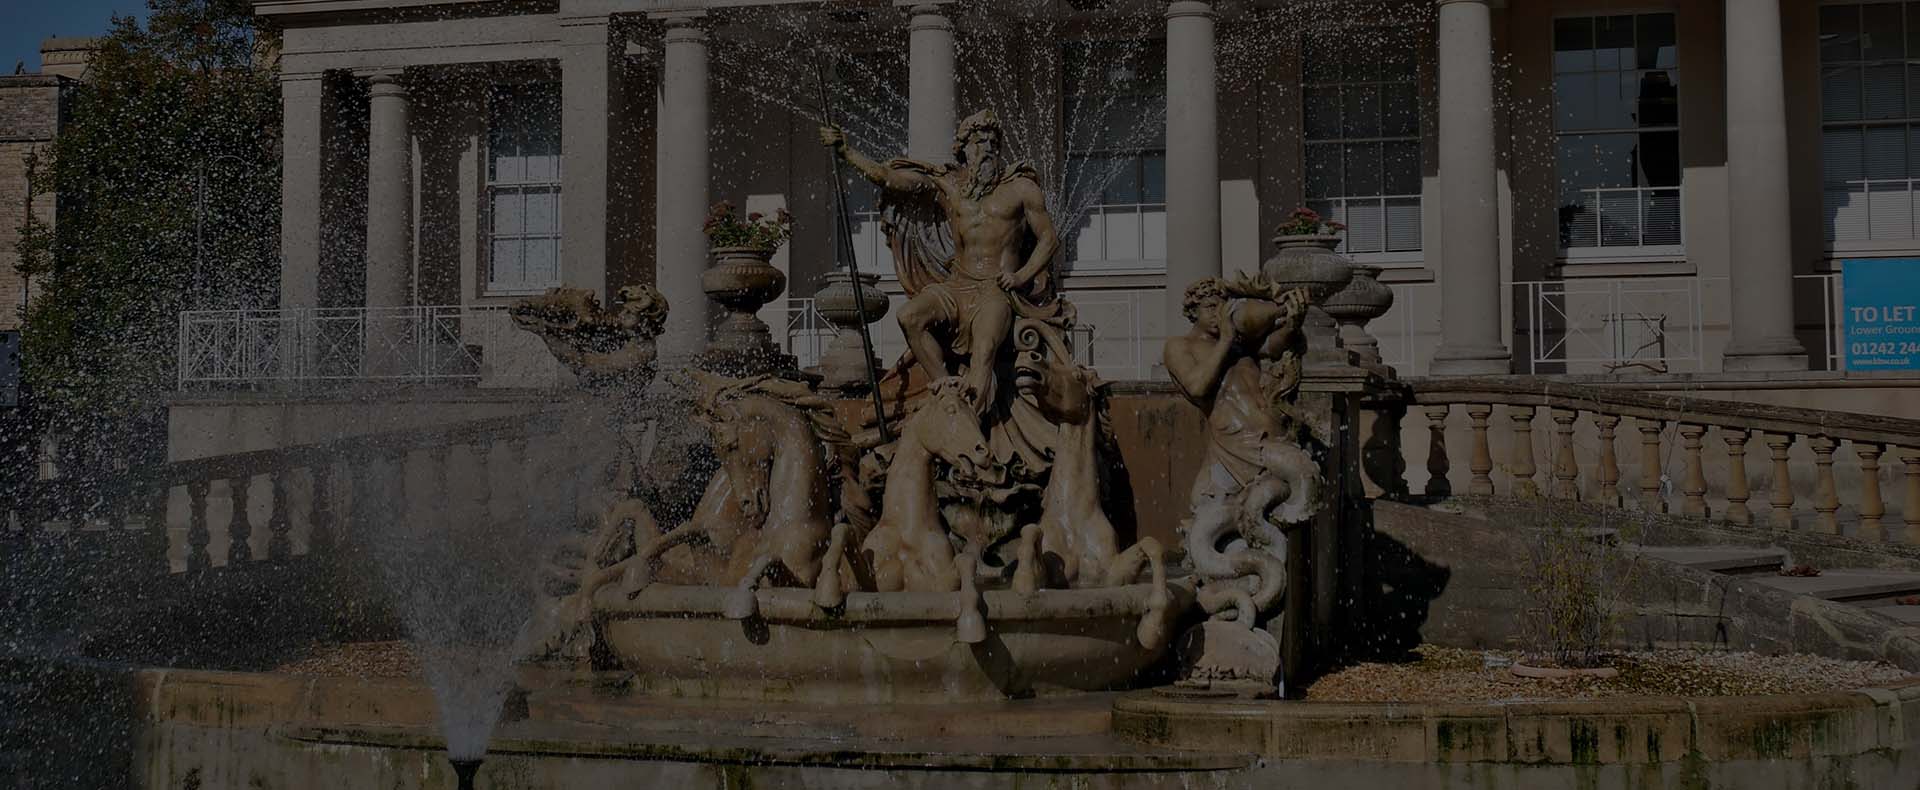 neptune fountain cheltenham with a building in background